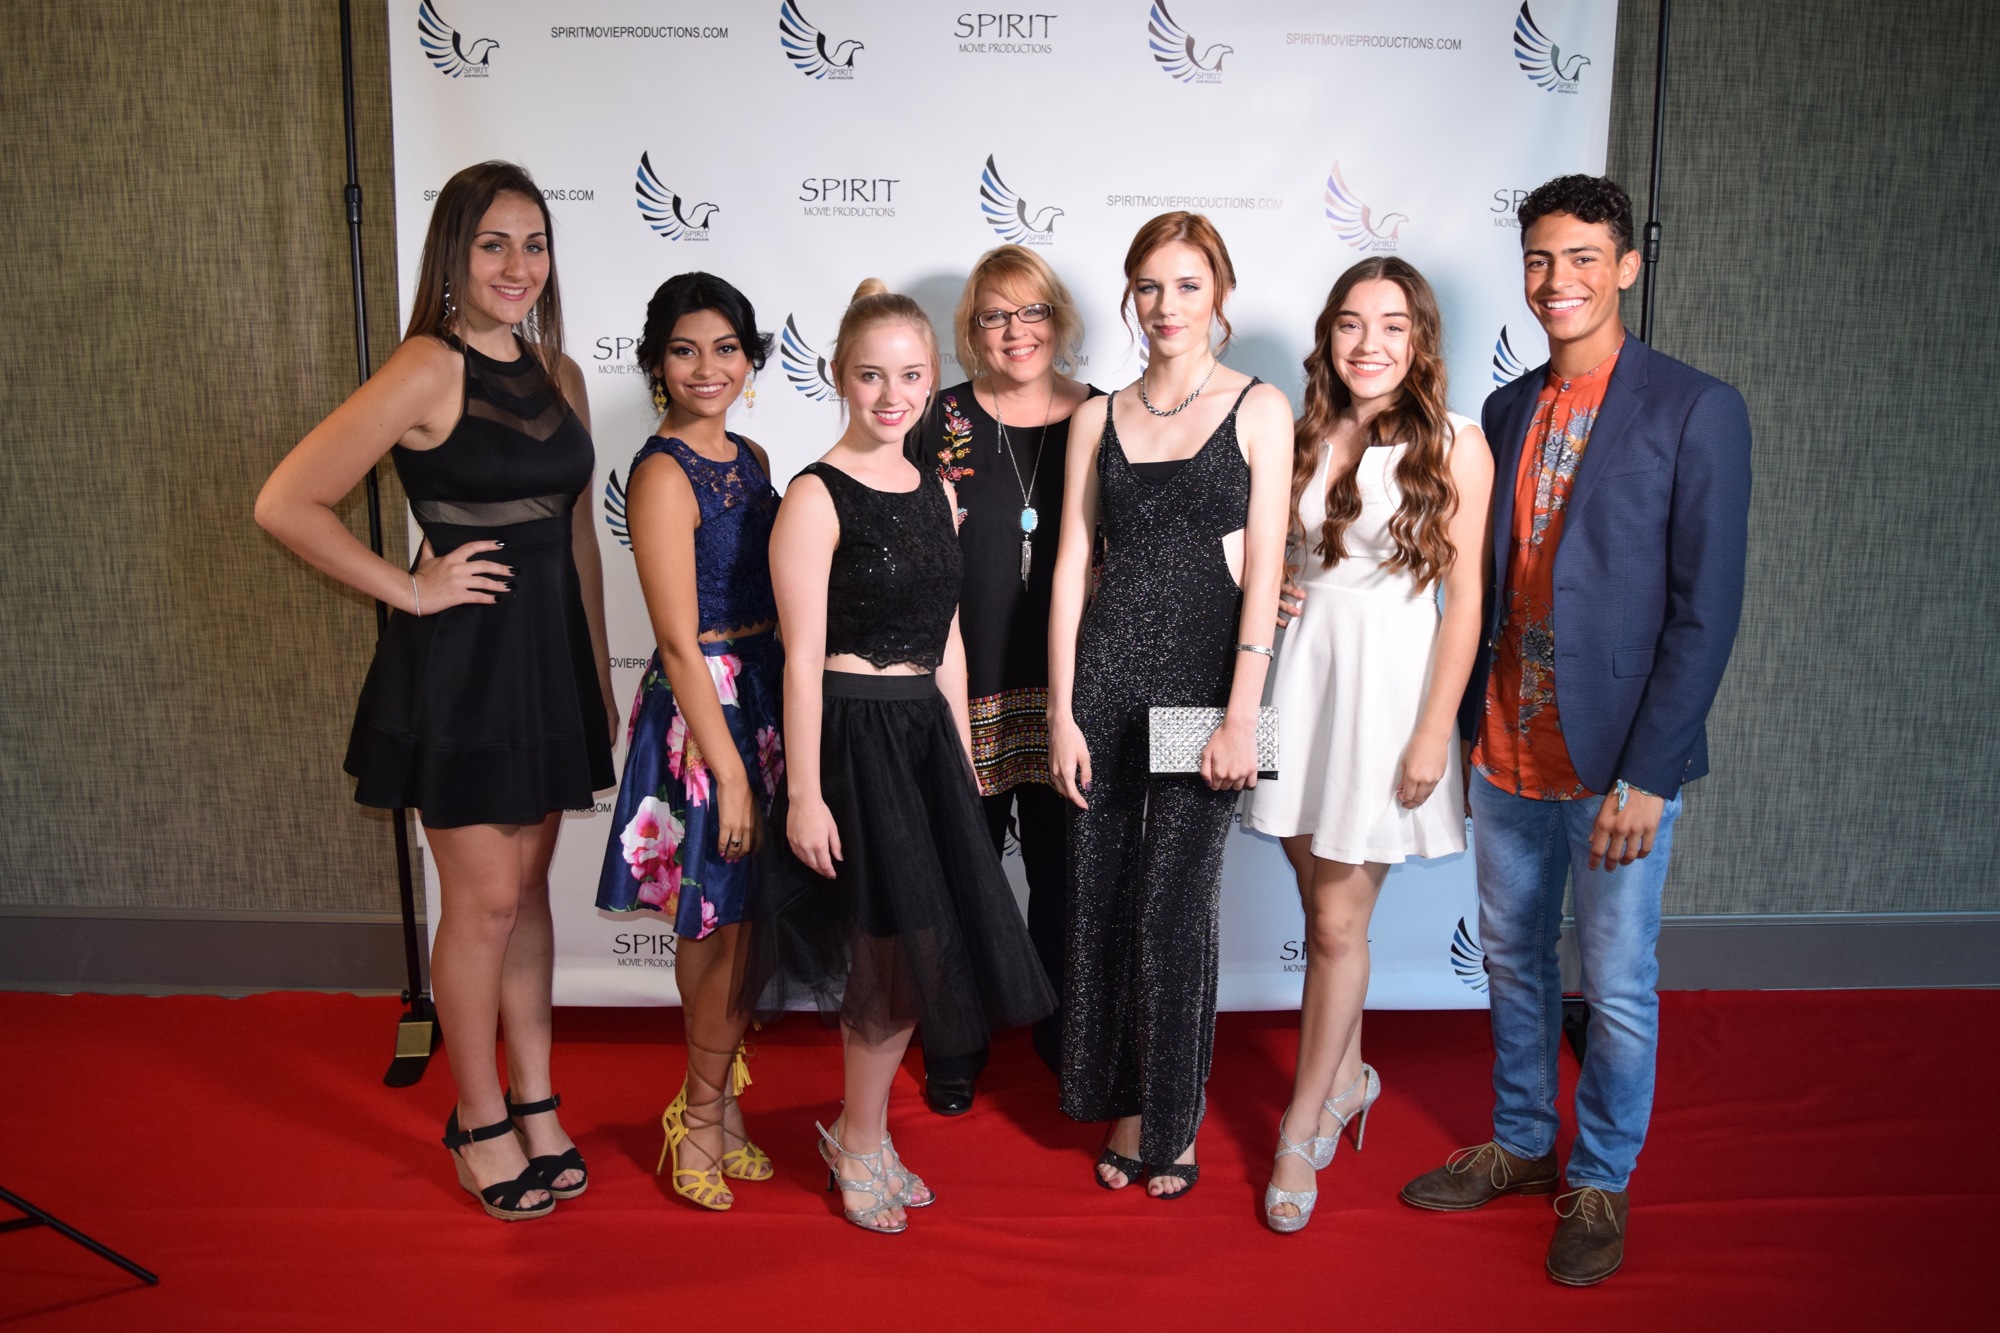 The “On Your Street” cast includes Zoe Rosenfield, Victoria Rodriguez, Bailey Gavulic, screenwriter Michelle Brown, Megan Brown, Oriana Bustamante and Tre’Len Johnston.